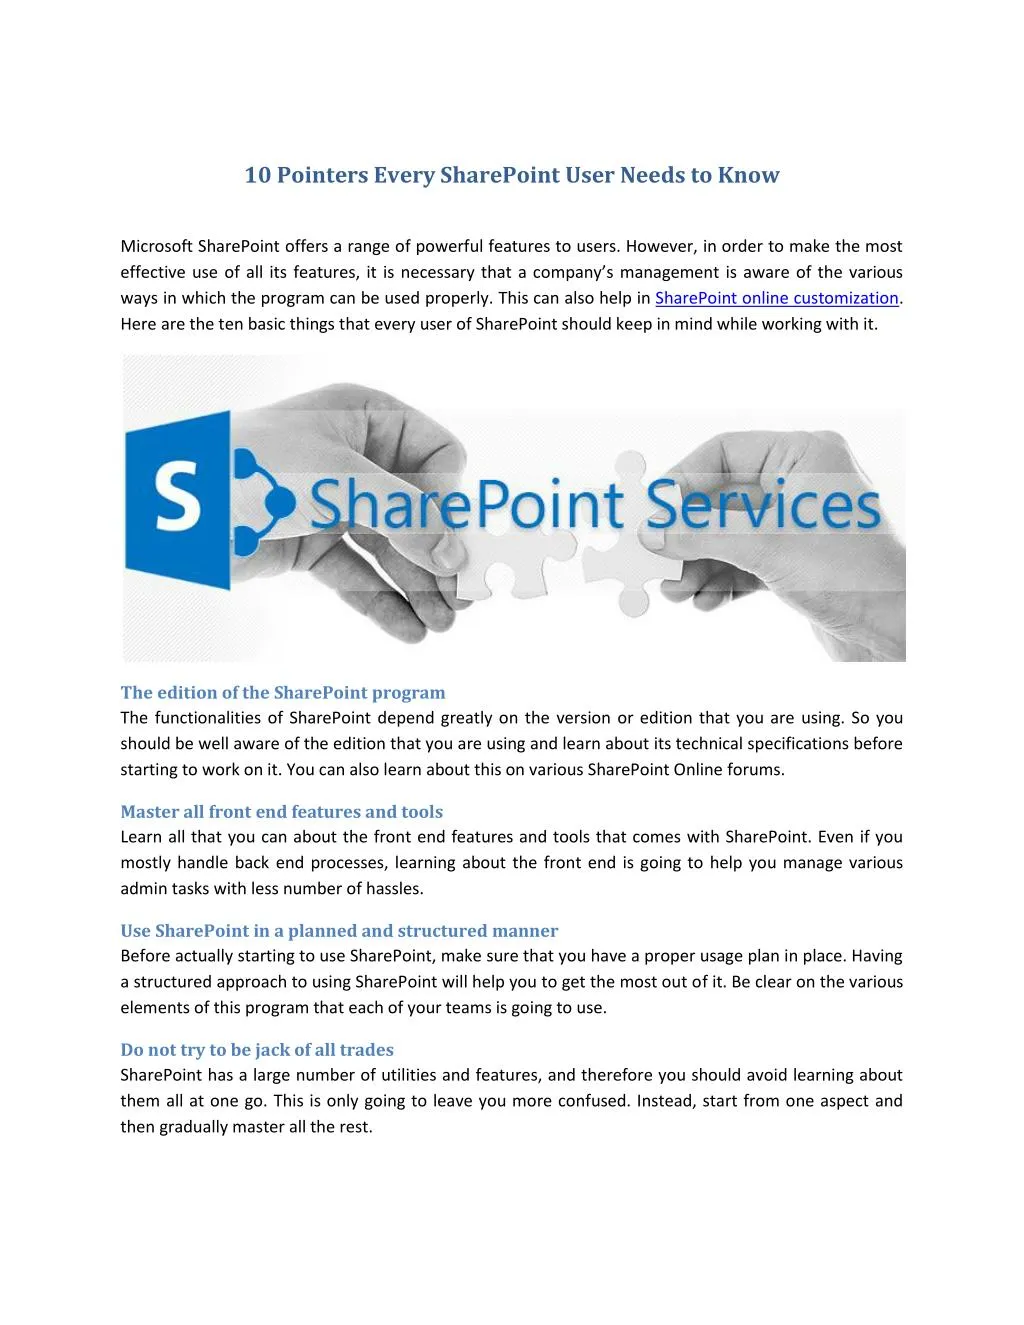 10 pointers every sharepoint user needs to know